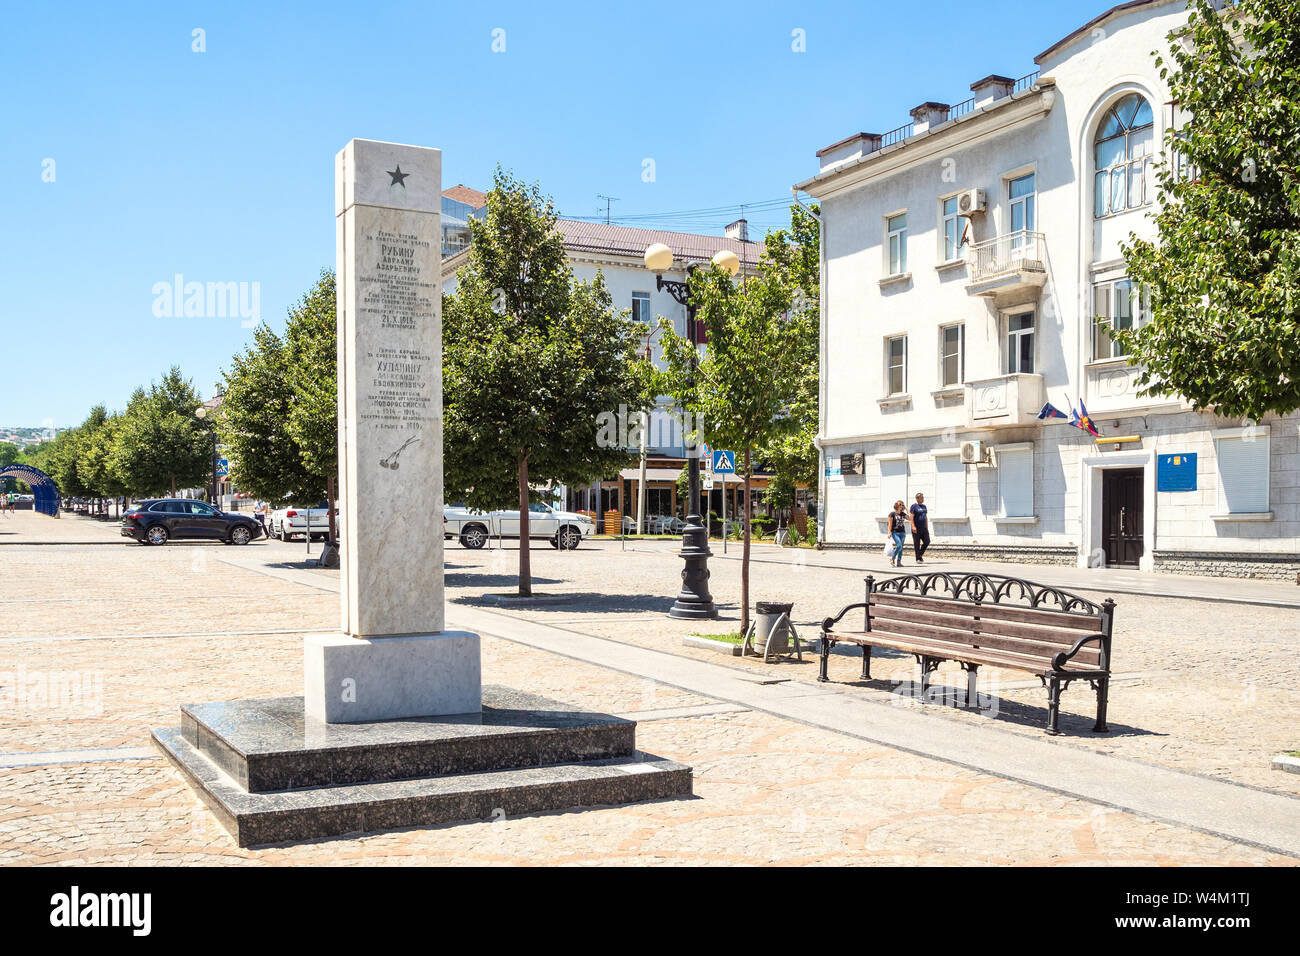 NOVOROSSIYSK, RUSSIA - JULY 7, 2019: Obelisk to the Heroes of the struggle for Soviet power on street of Novorossiysk Republic. Novorossiysk is city i Stock Photo